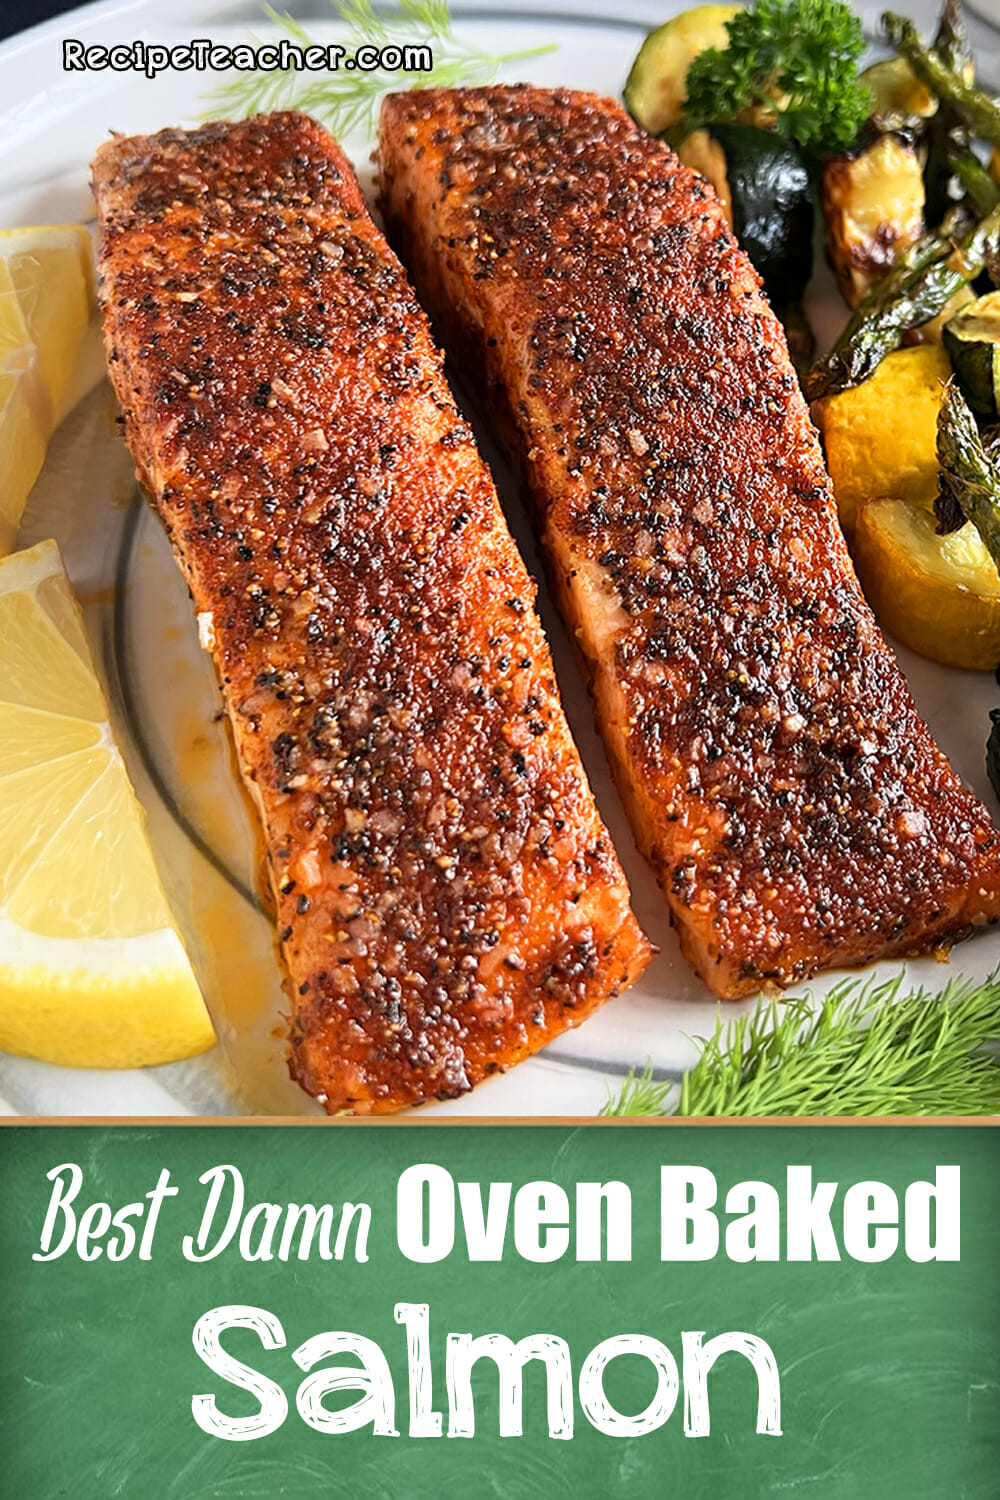 Recipe for oven baked salmon